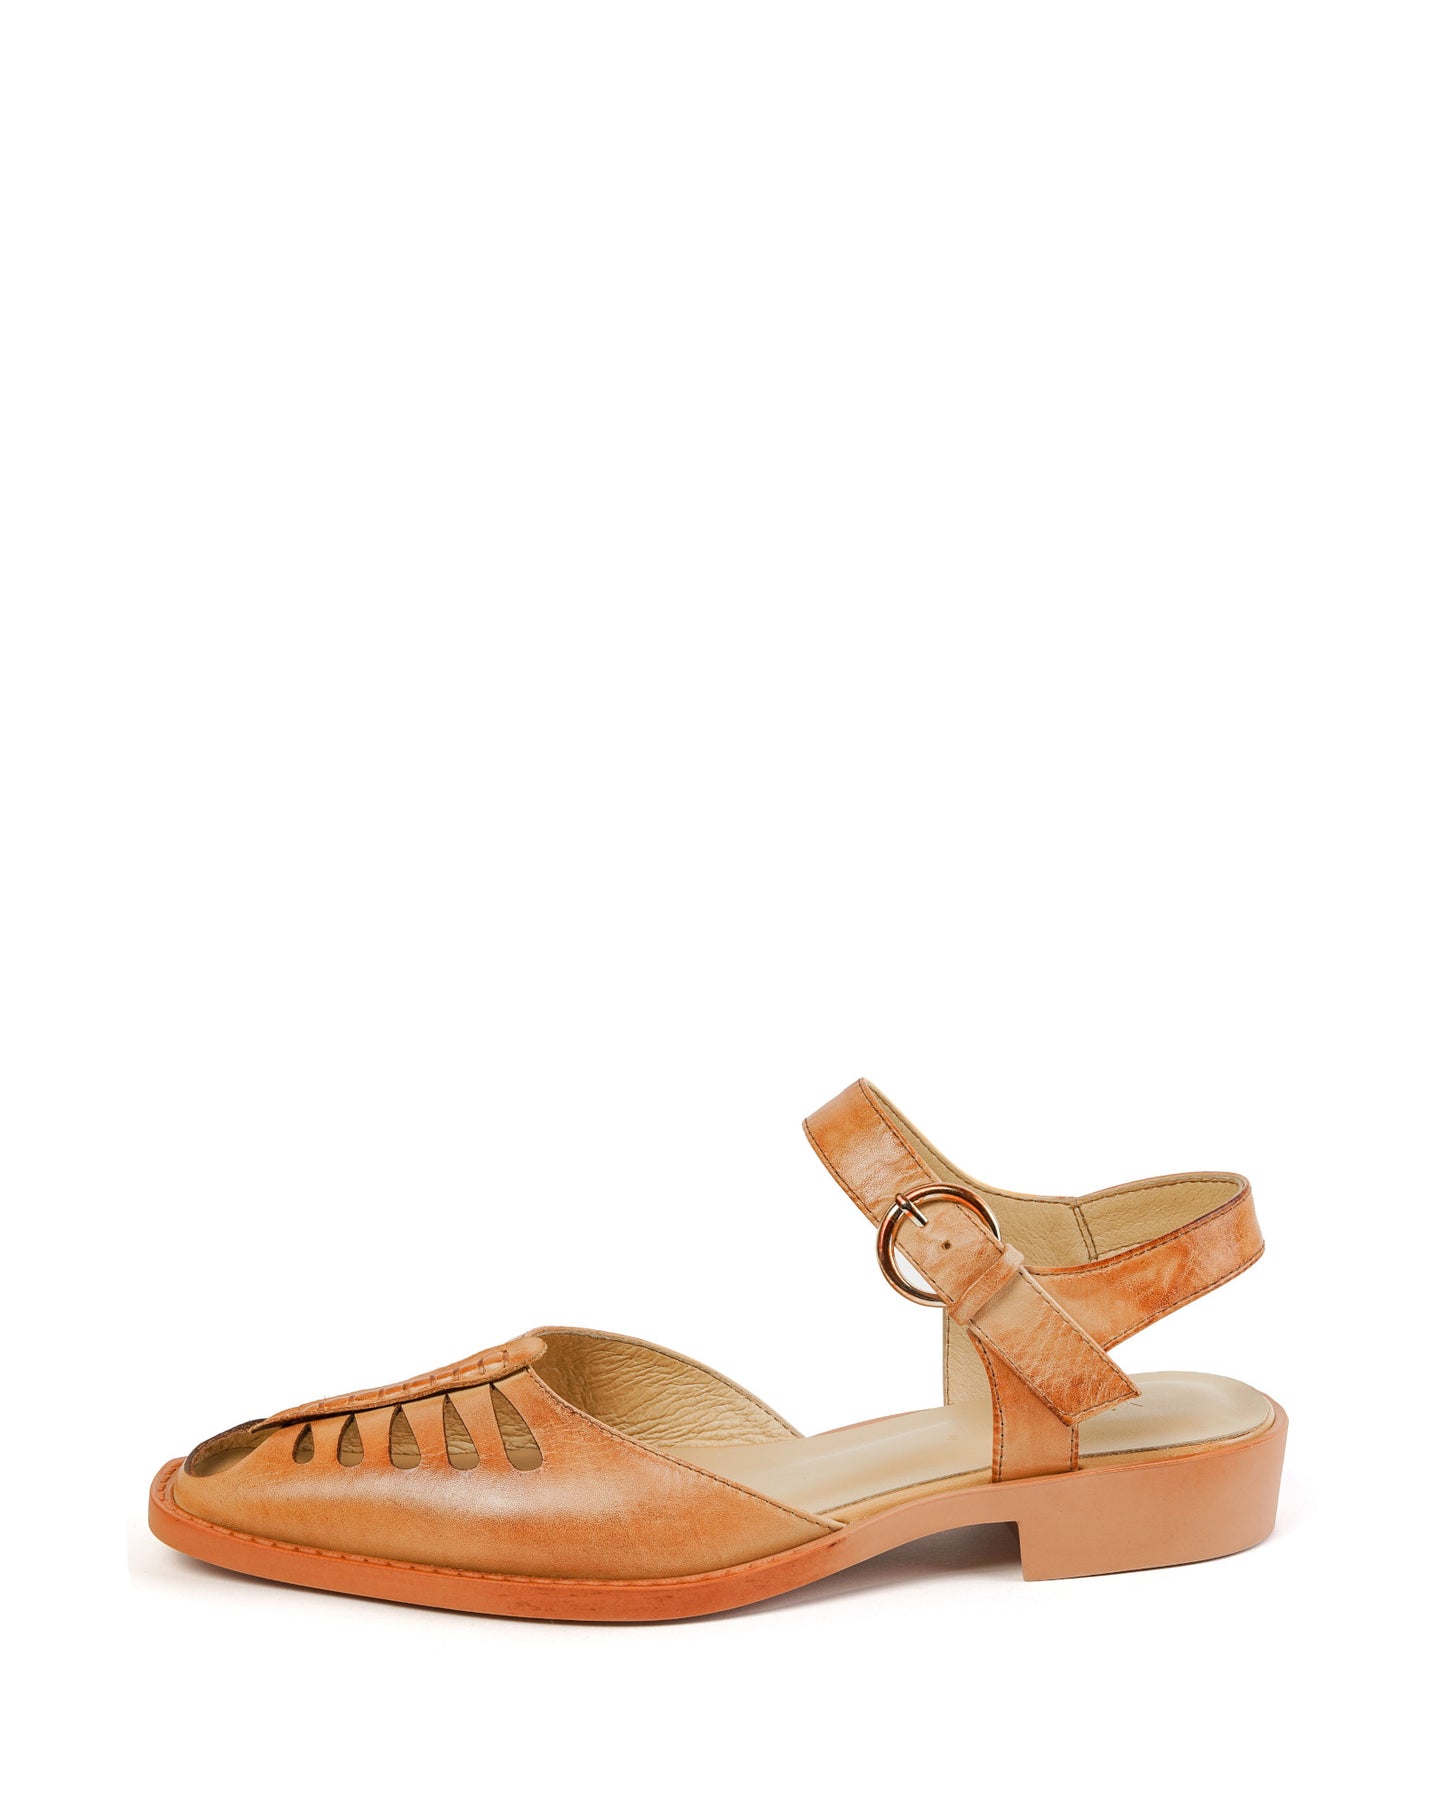 Zona-Tan-Leather-Sandals-1